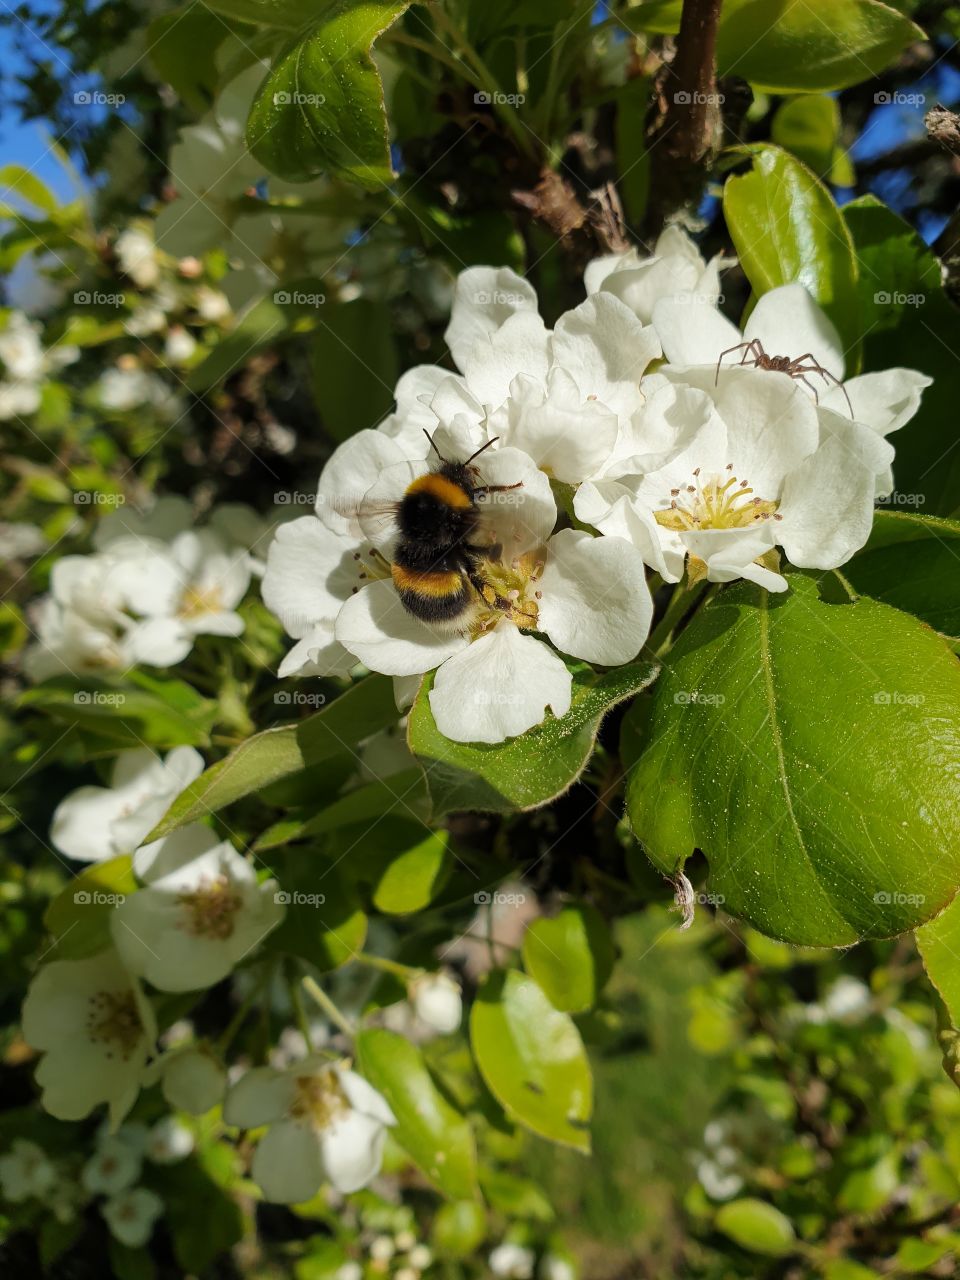 A bumblebee in a tree